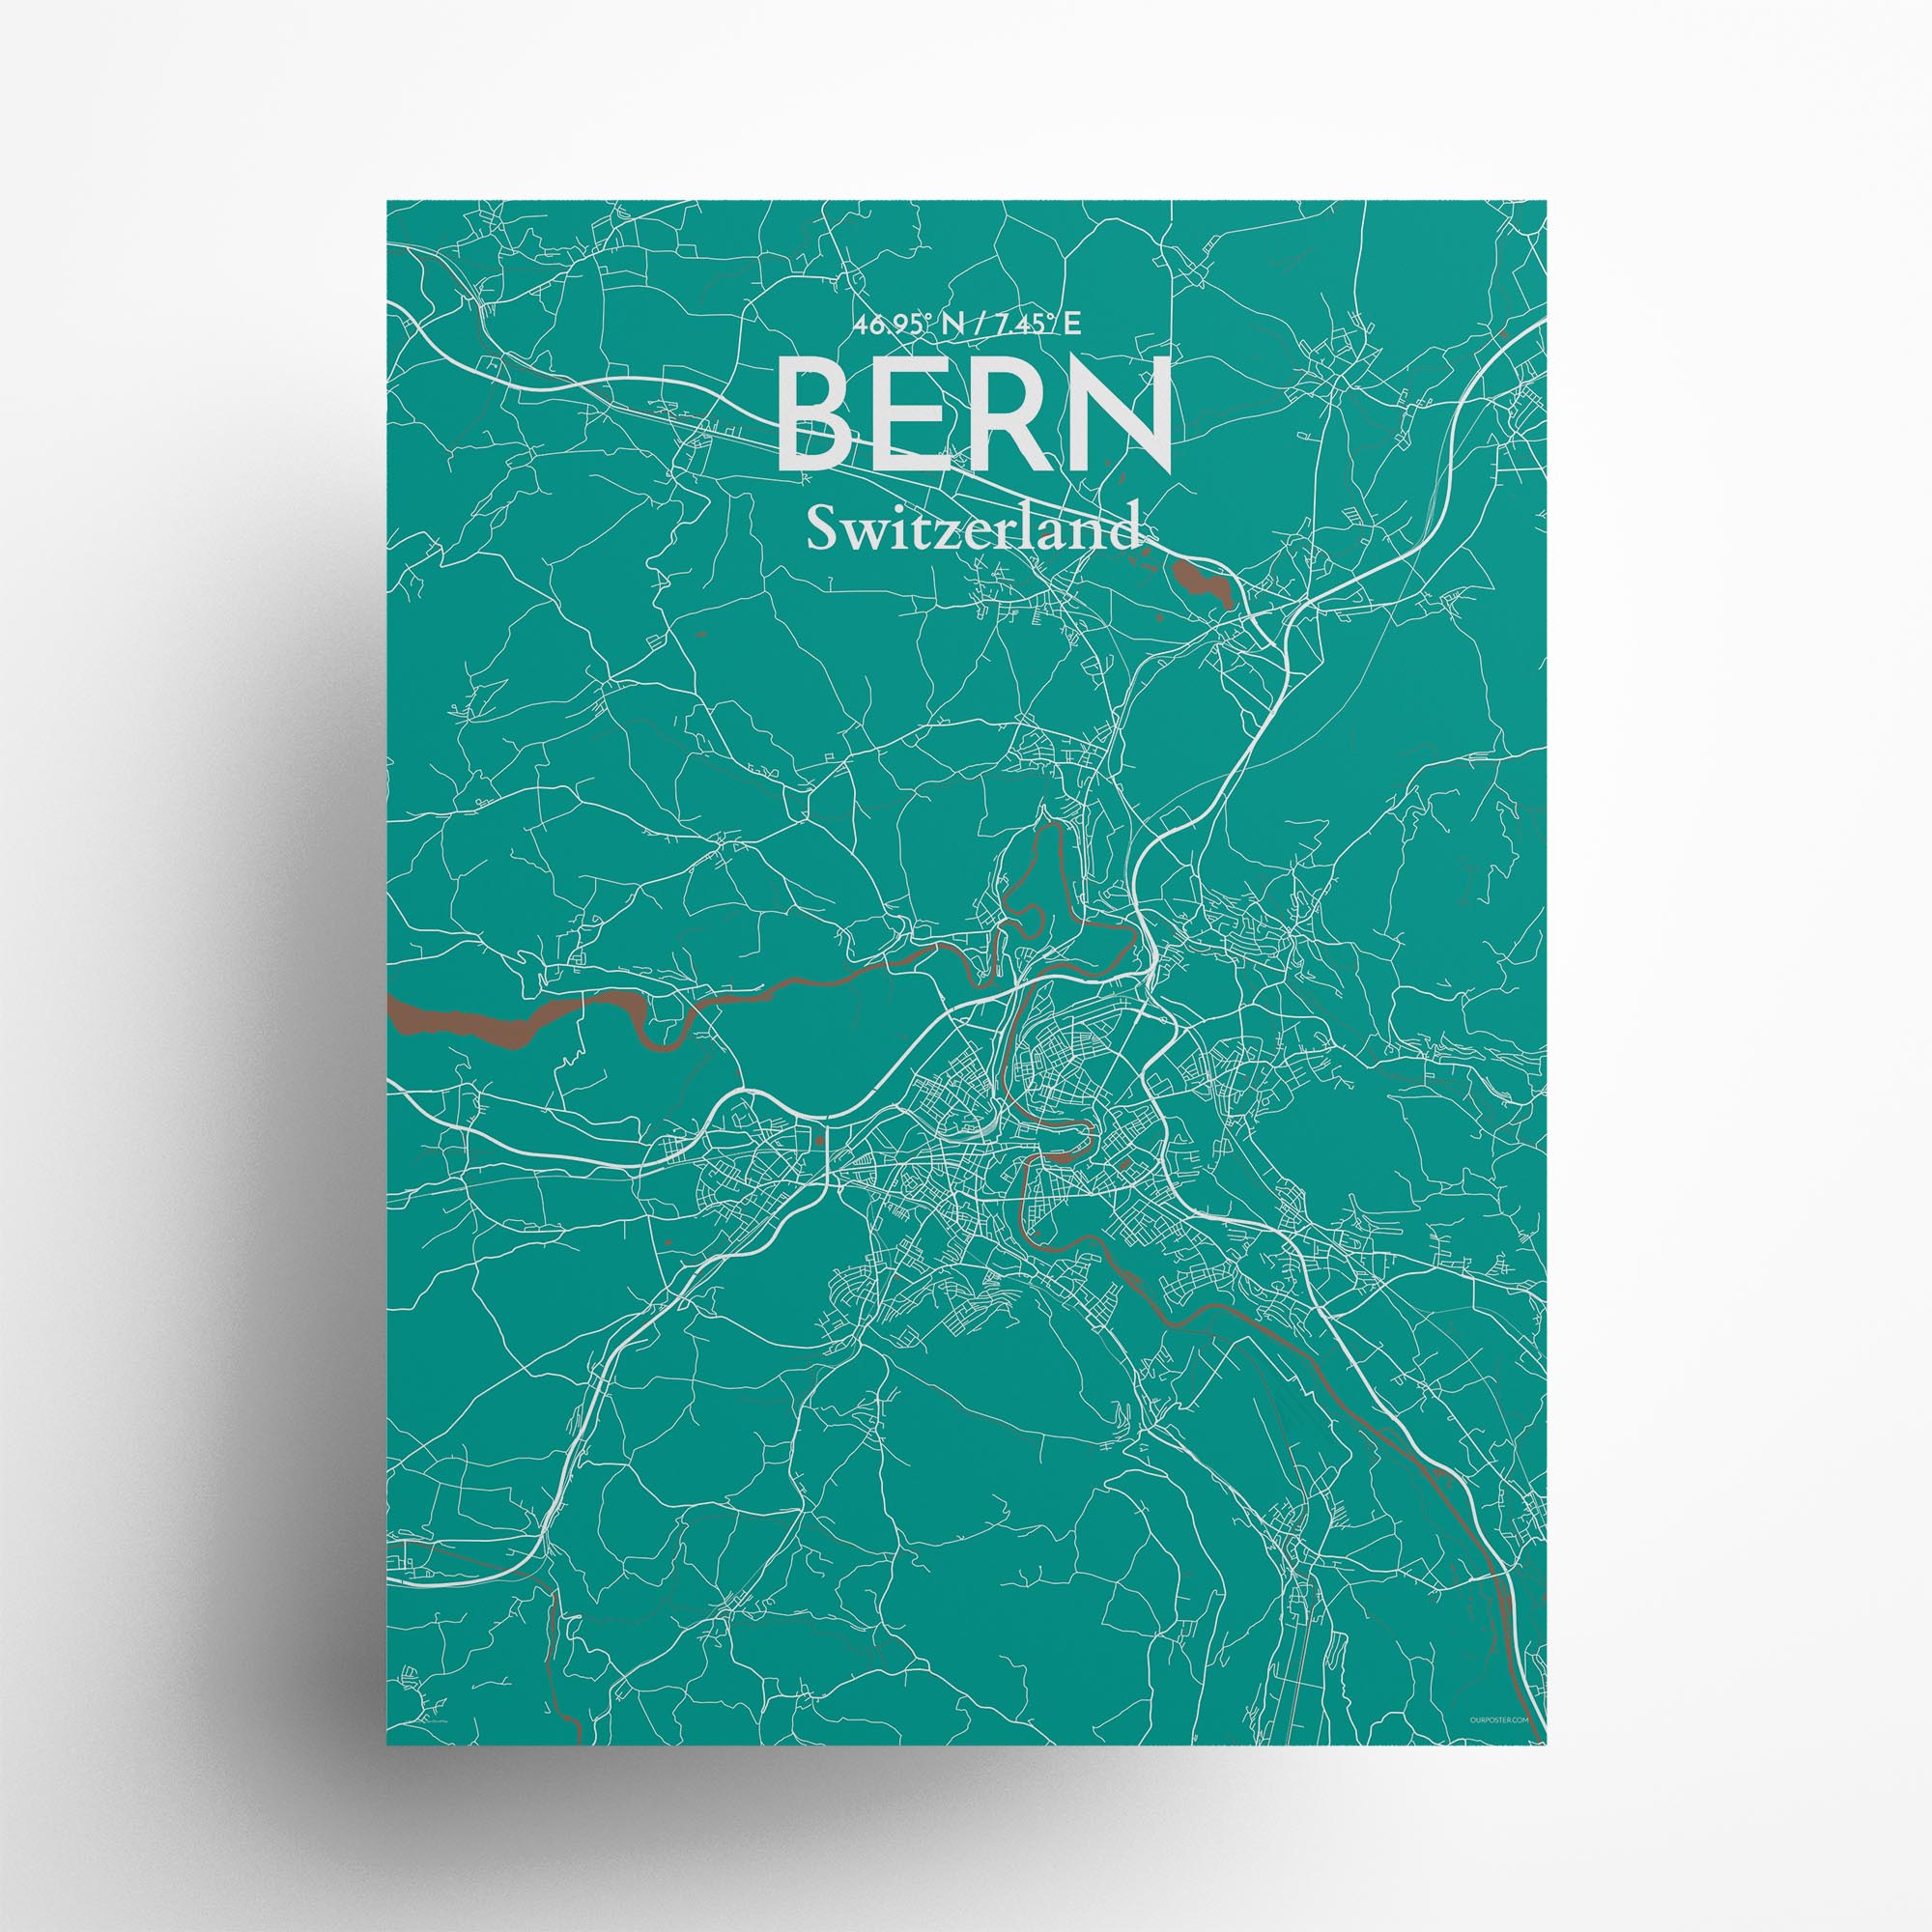 Bern city map poster in Nature of size 18" x 24"